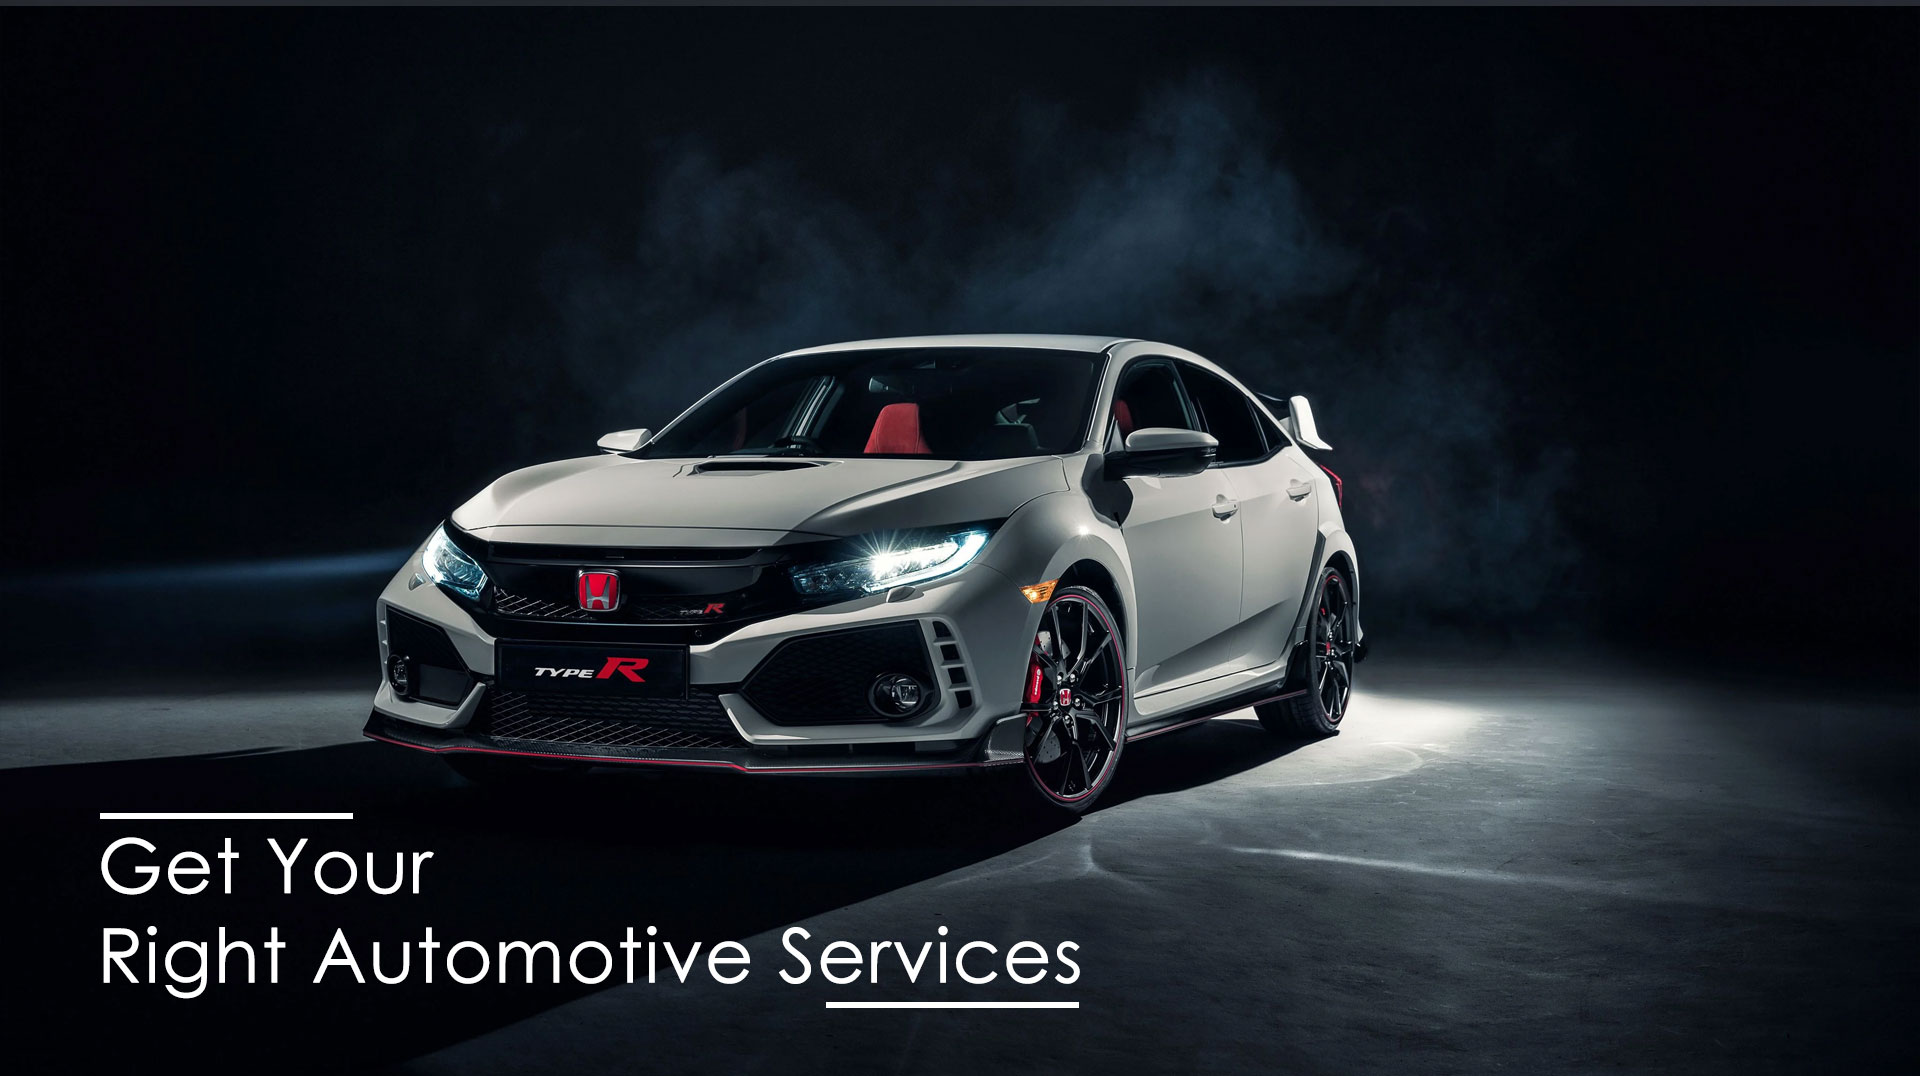 Get your right automotive services